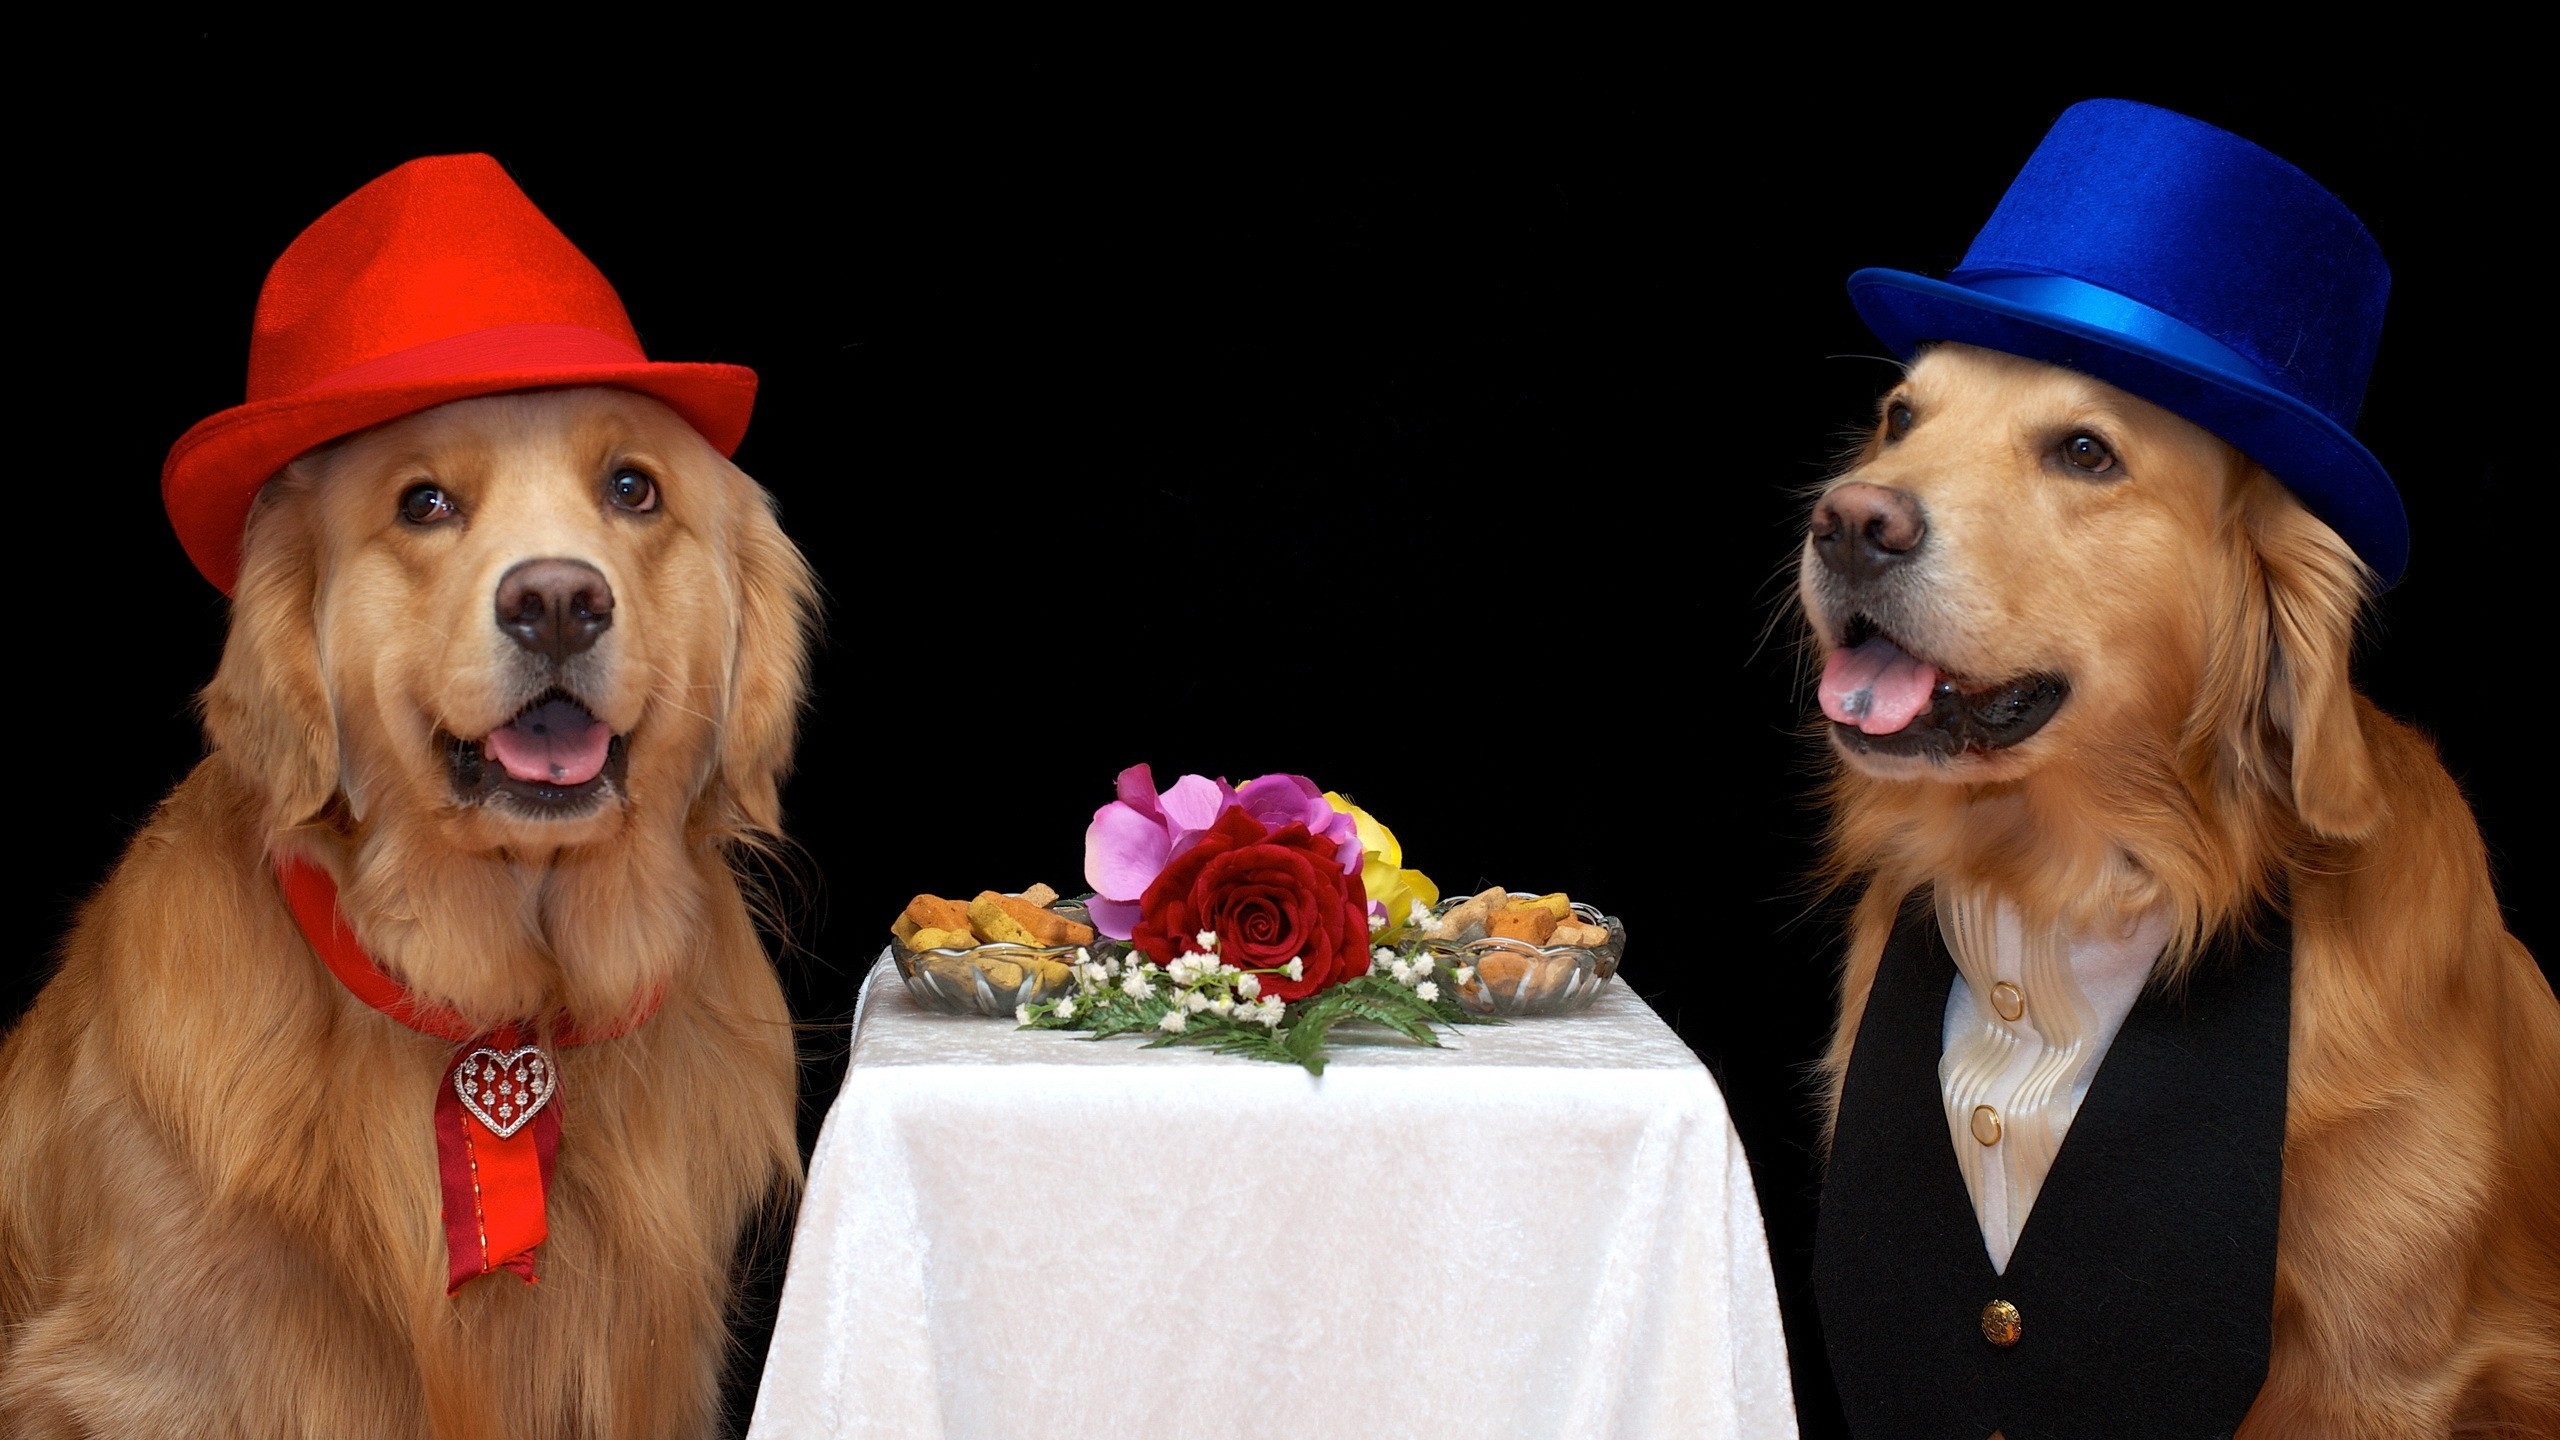 Dog Couple Dating for 2560x1440 HDTV resolution